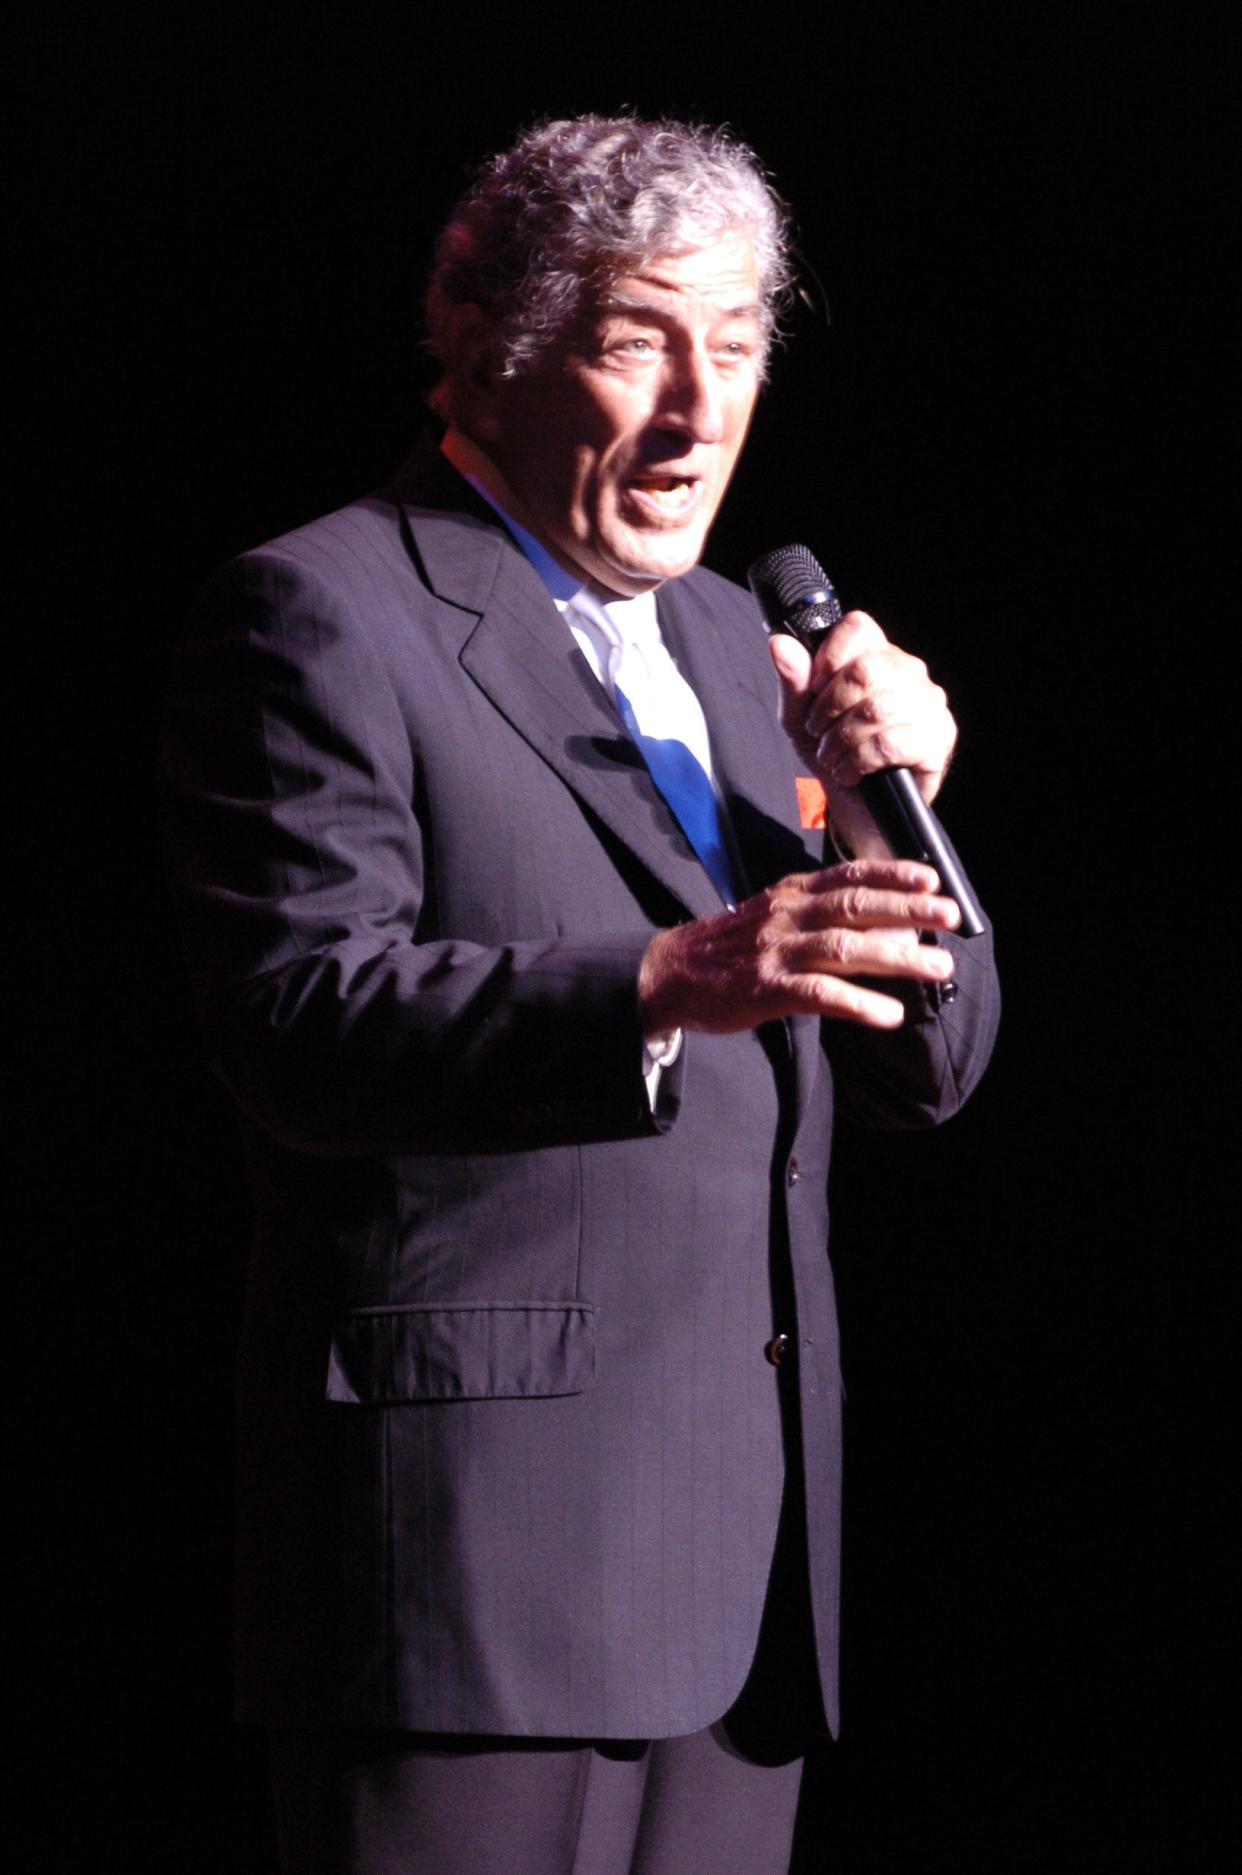 Tony Bennett performed Saturday, Aug. 20, 2005, at the Morris Performing Arts Center in South Bend. The singer died July 21, 2023, at the age of 96.